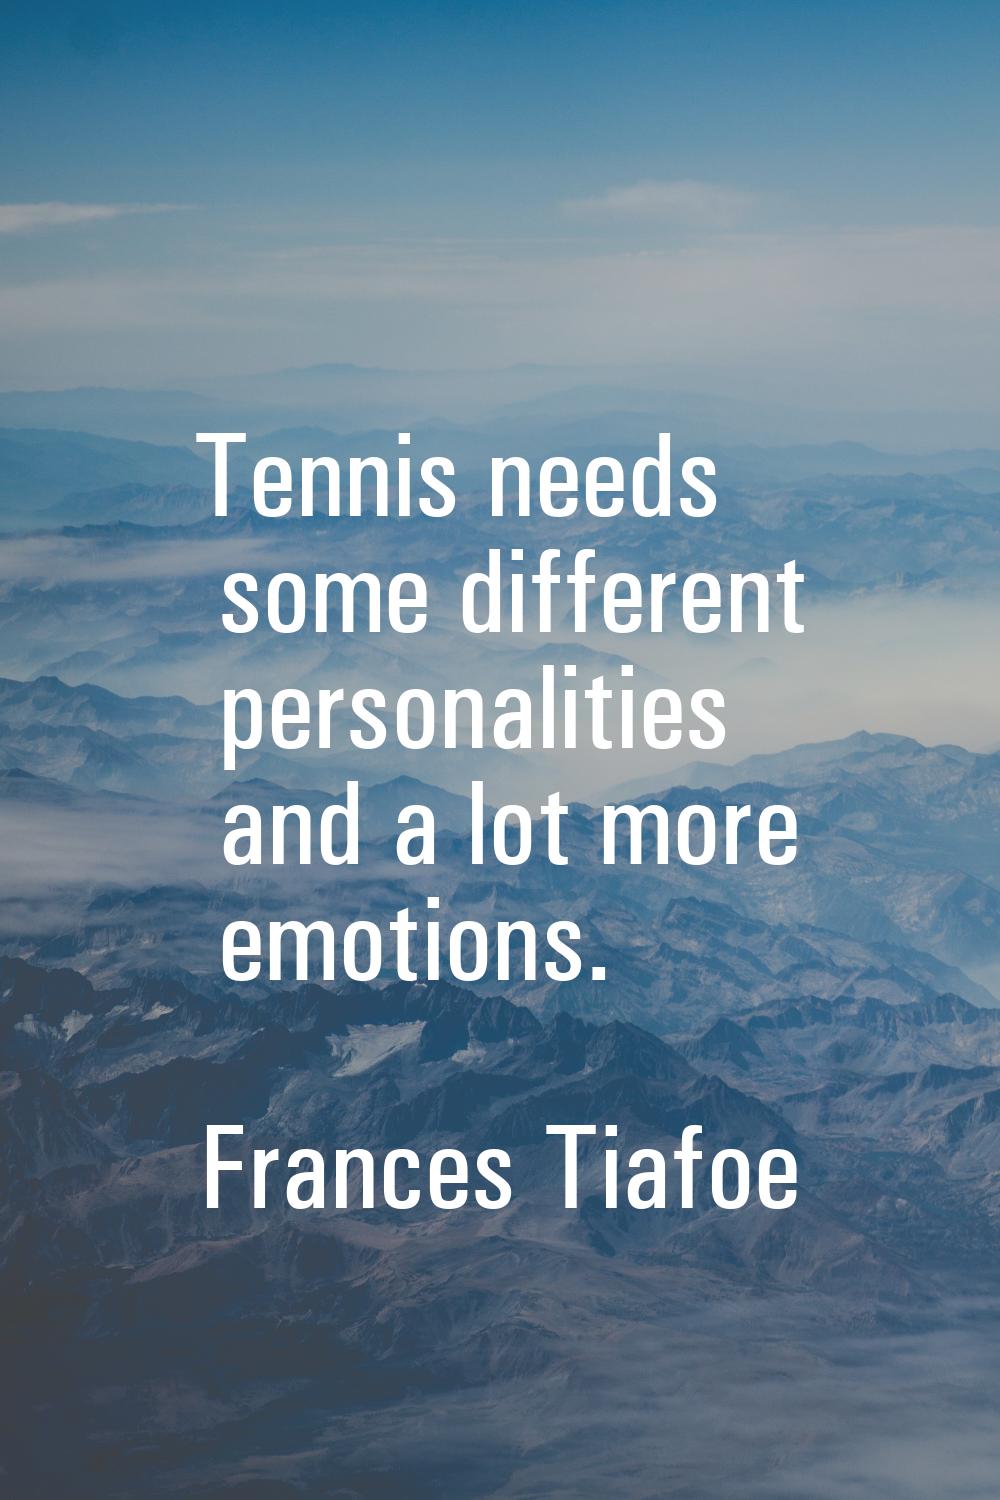 Tennis needs some different personalities and a lot more emotions.